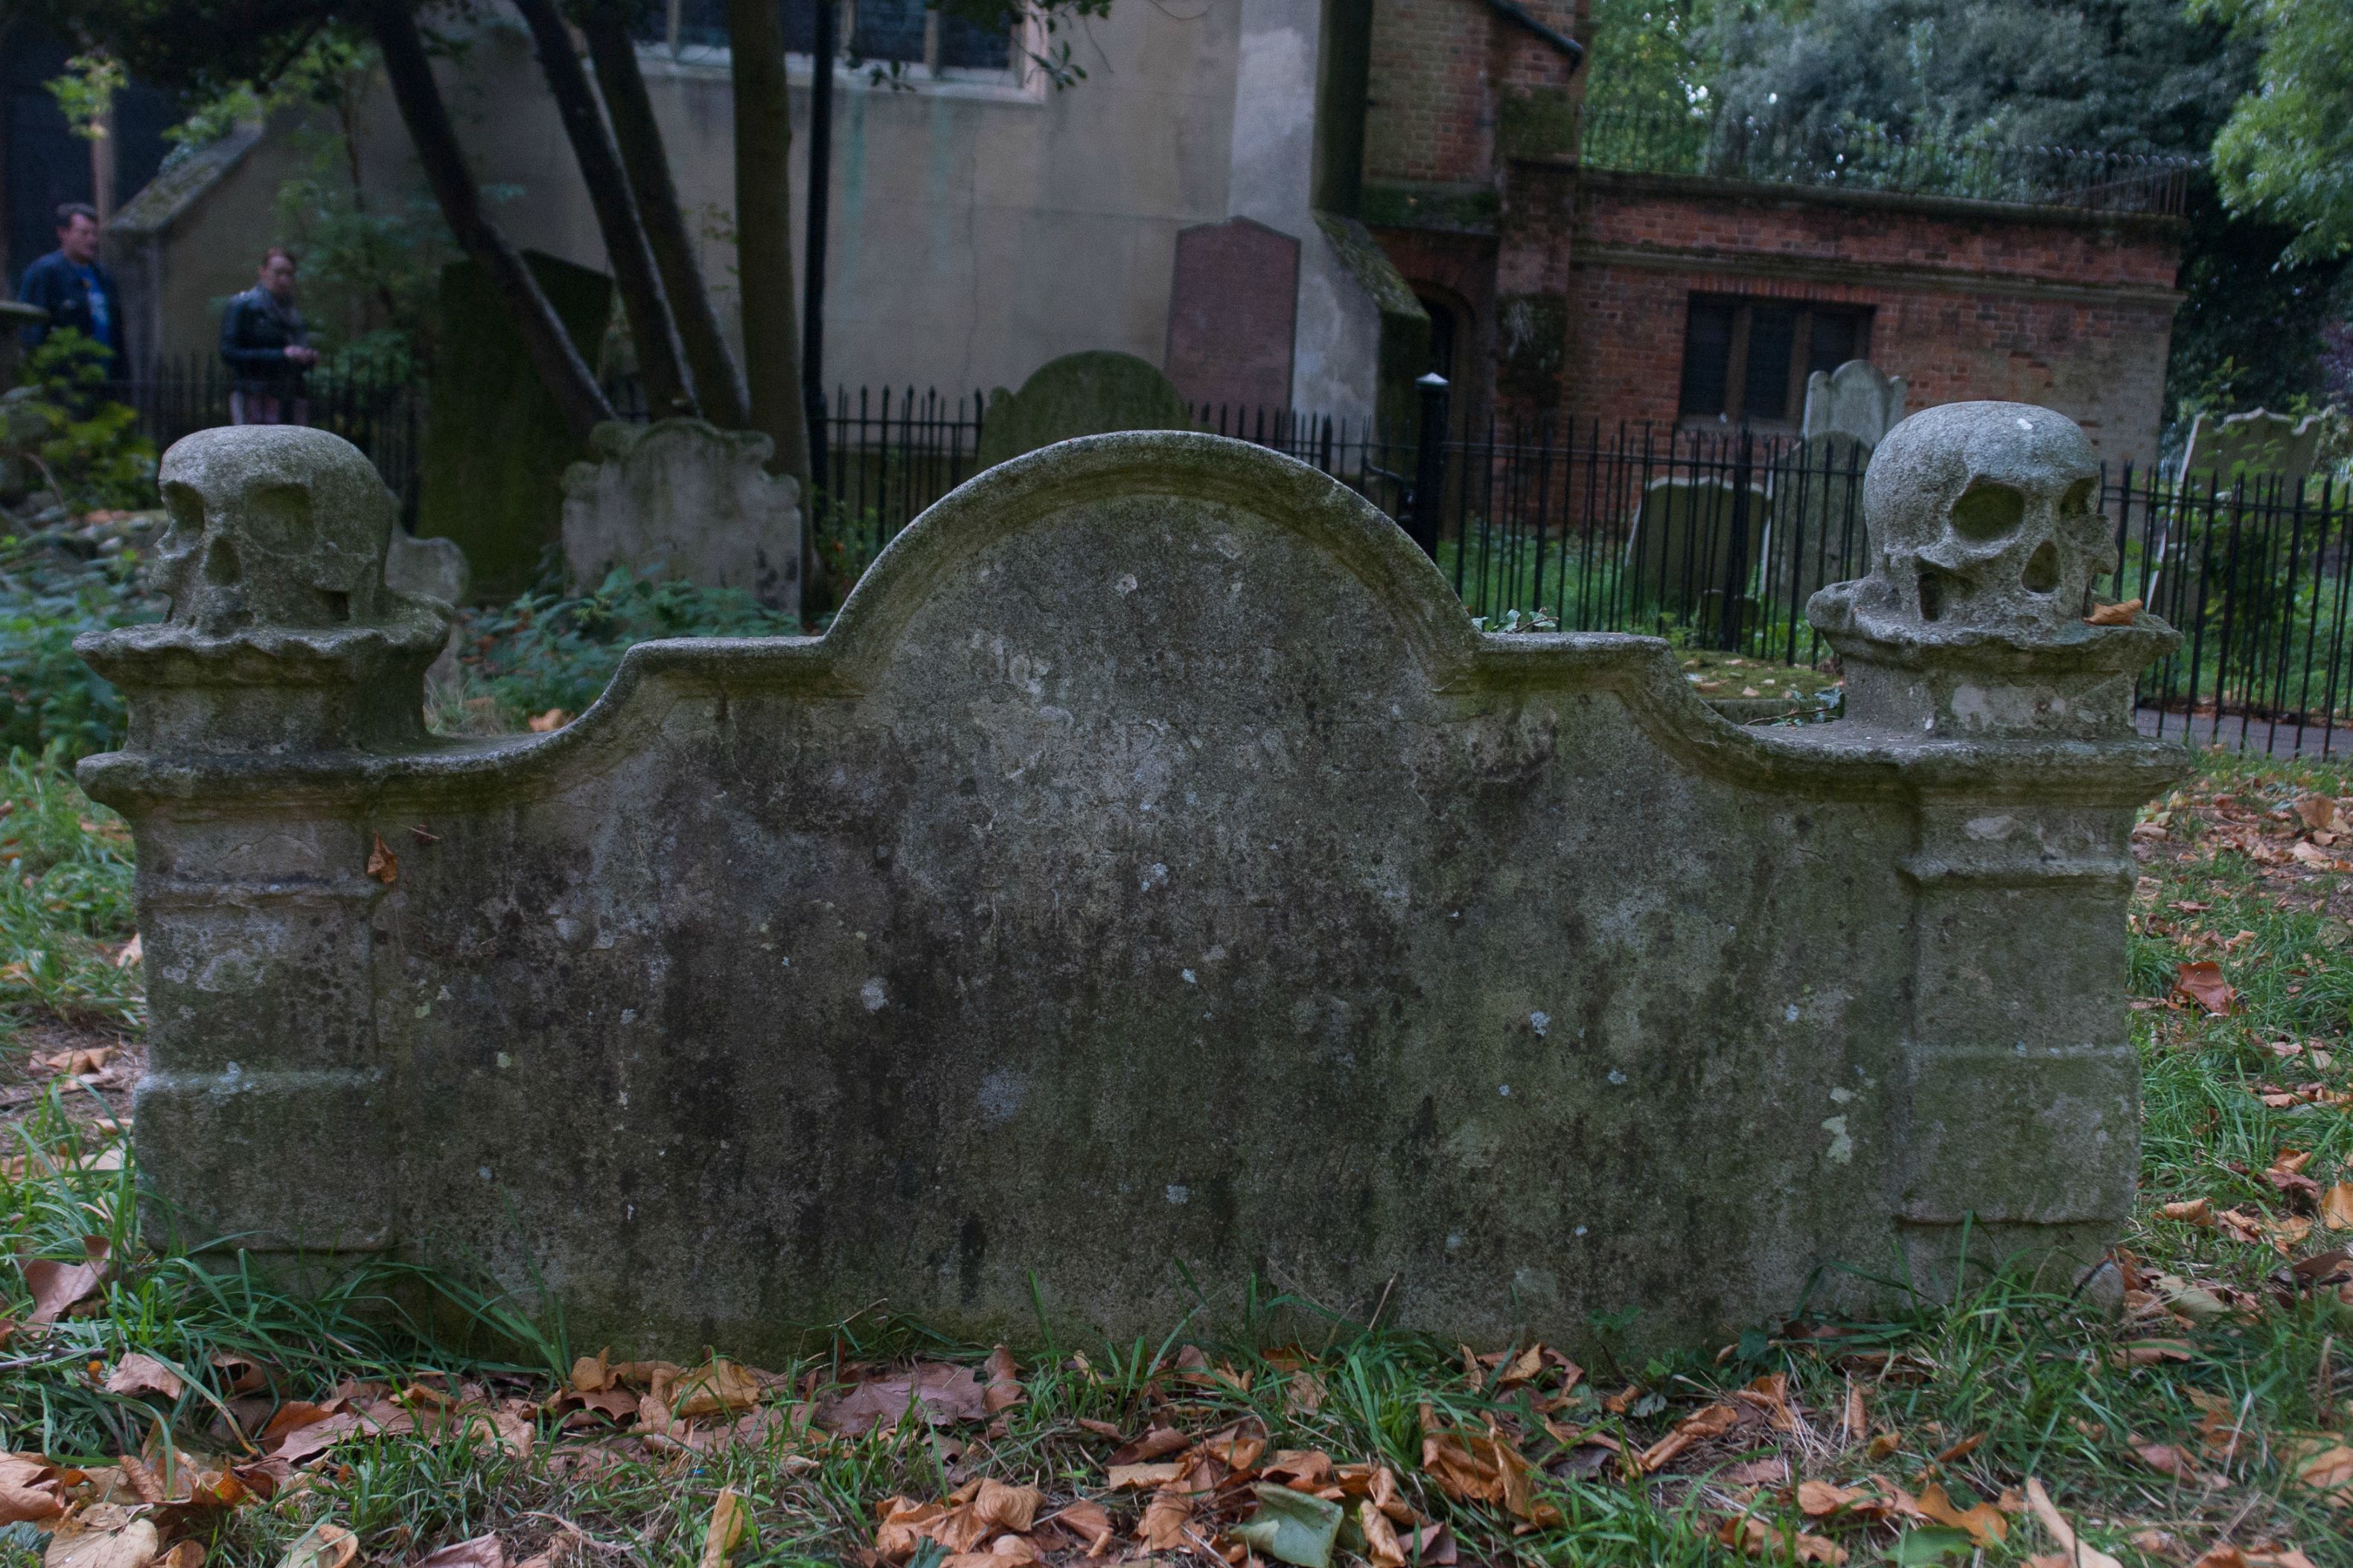 Headstone with two carved skulls, Stoke Newington cemetery, London